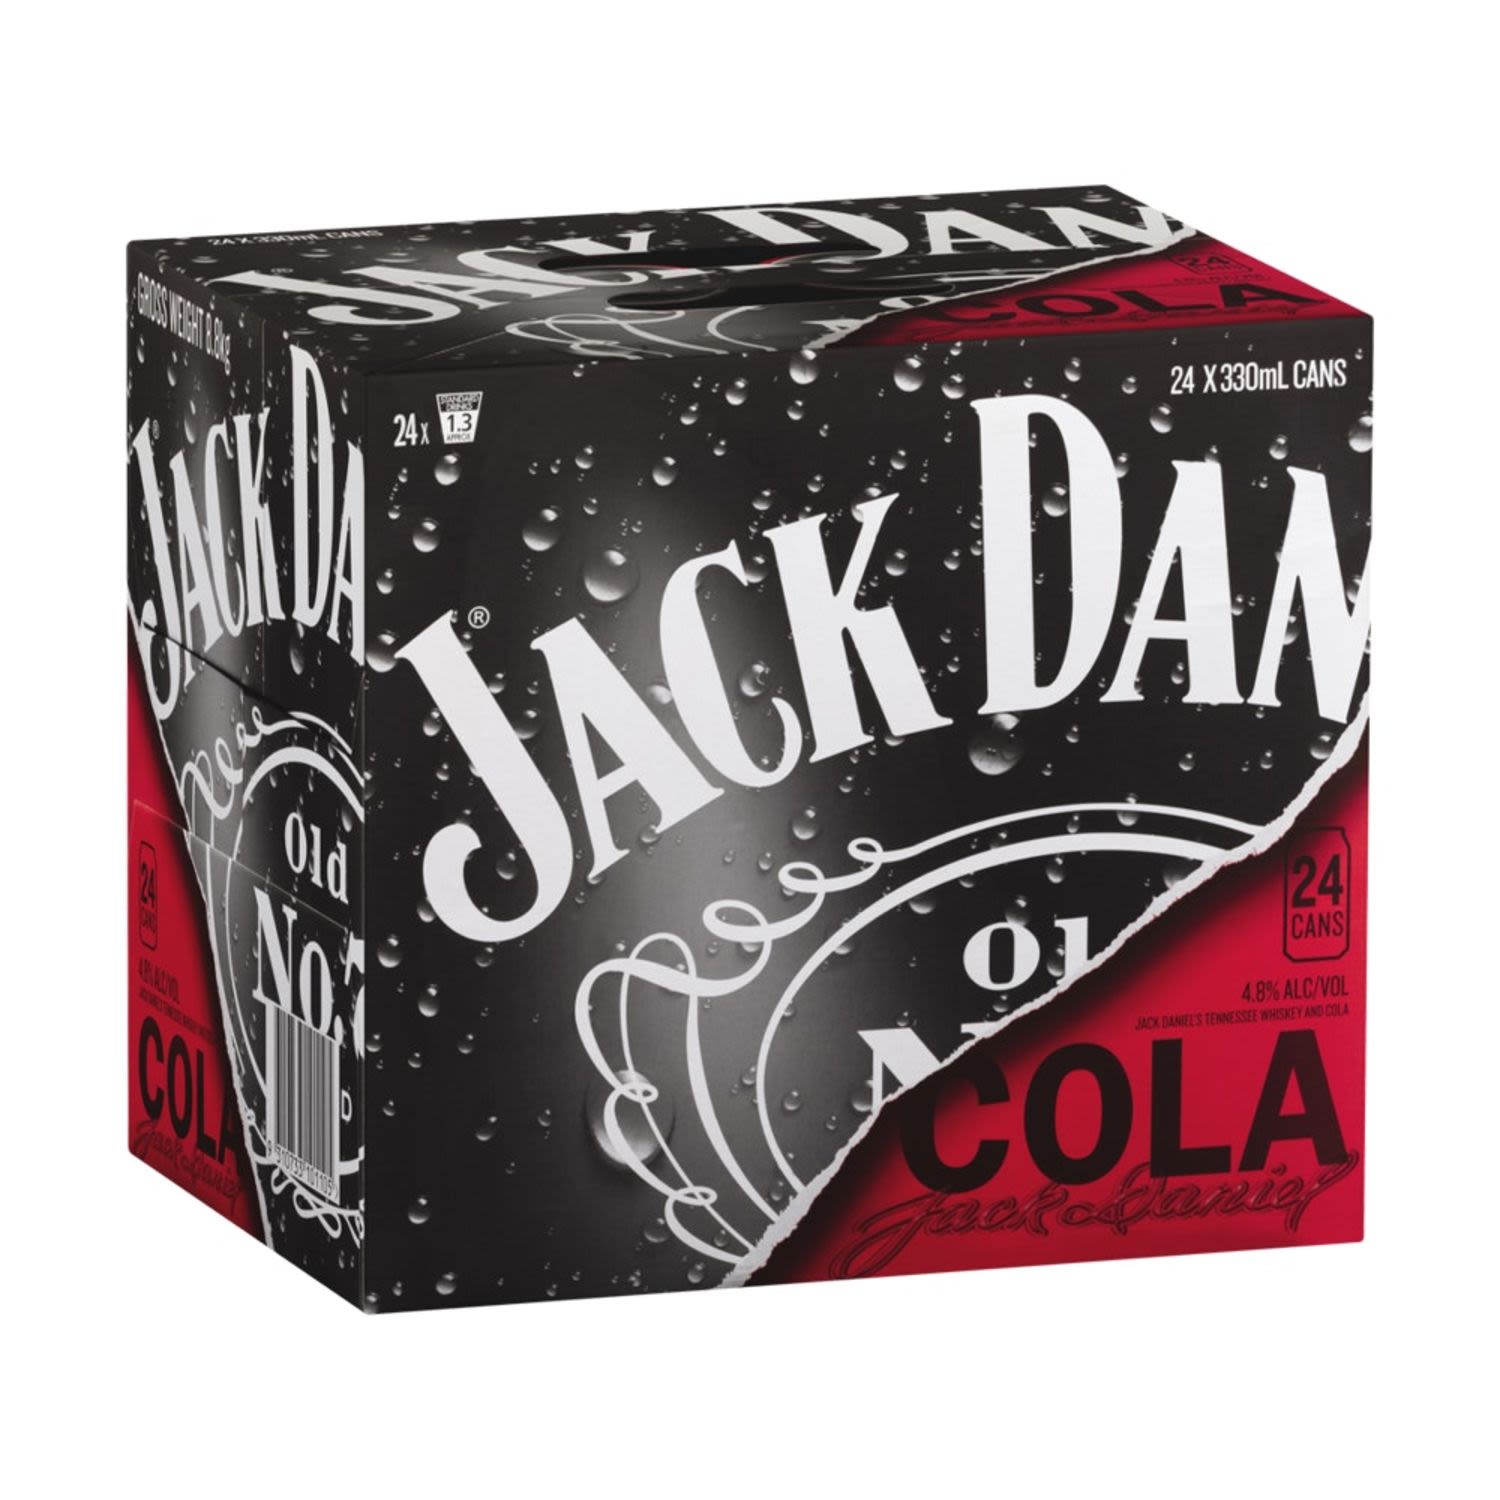 Jack Daniel’s Old No. 7 is charcoal mellowed drop by drop, giving our whiskey its unique flavour. Enjoy it perfectly mixed with cola.<br /> <br />Alcohol Volume: 4.80%<br /><br />Pack Format: 24 Pack Cube<br /><br />Standard Drinks: 1.3</br /><br />Pack Type: Can<br />